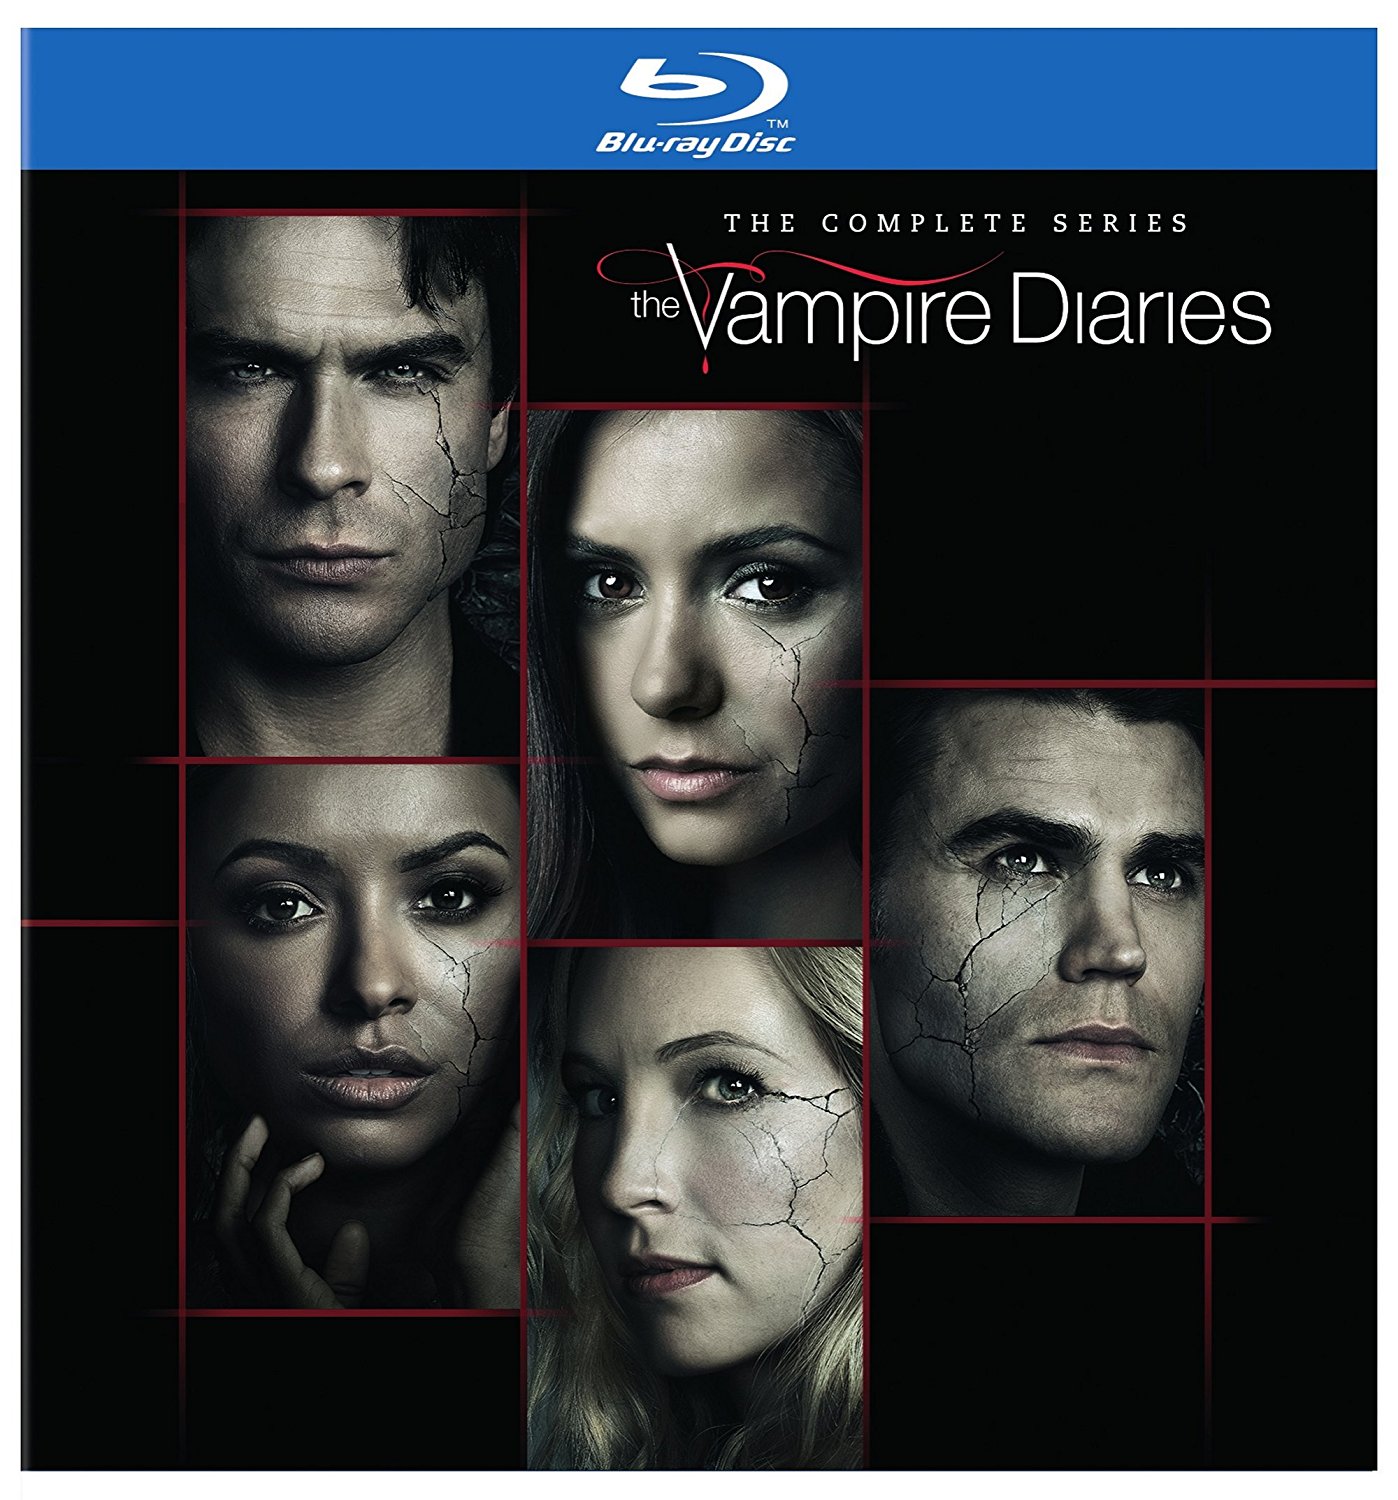 Pre-Order The Vampire Diaries Season 8 Today or Complete Series, Out - What Is The Order Of The Vampire Diaries Series